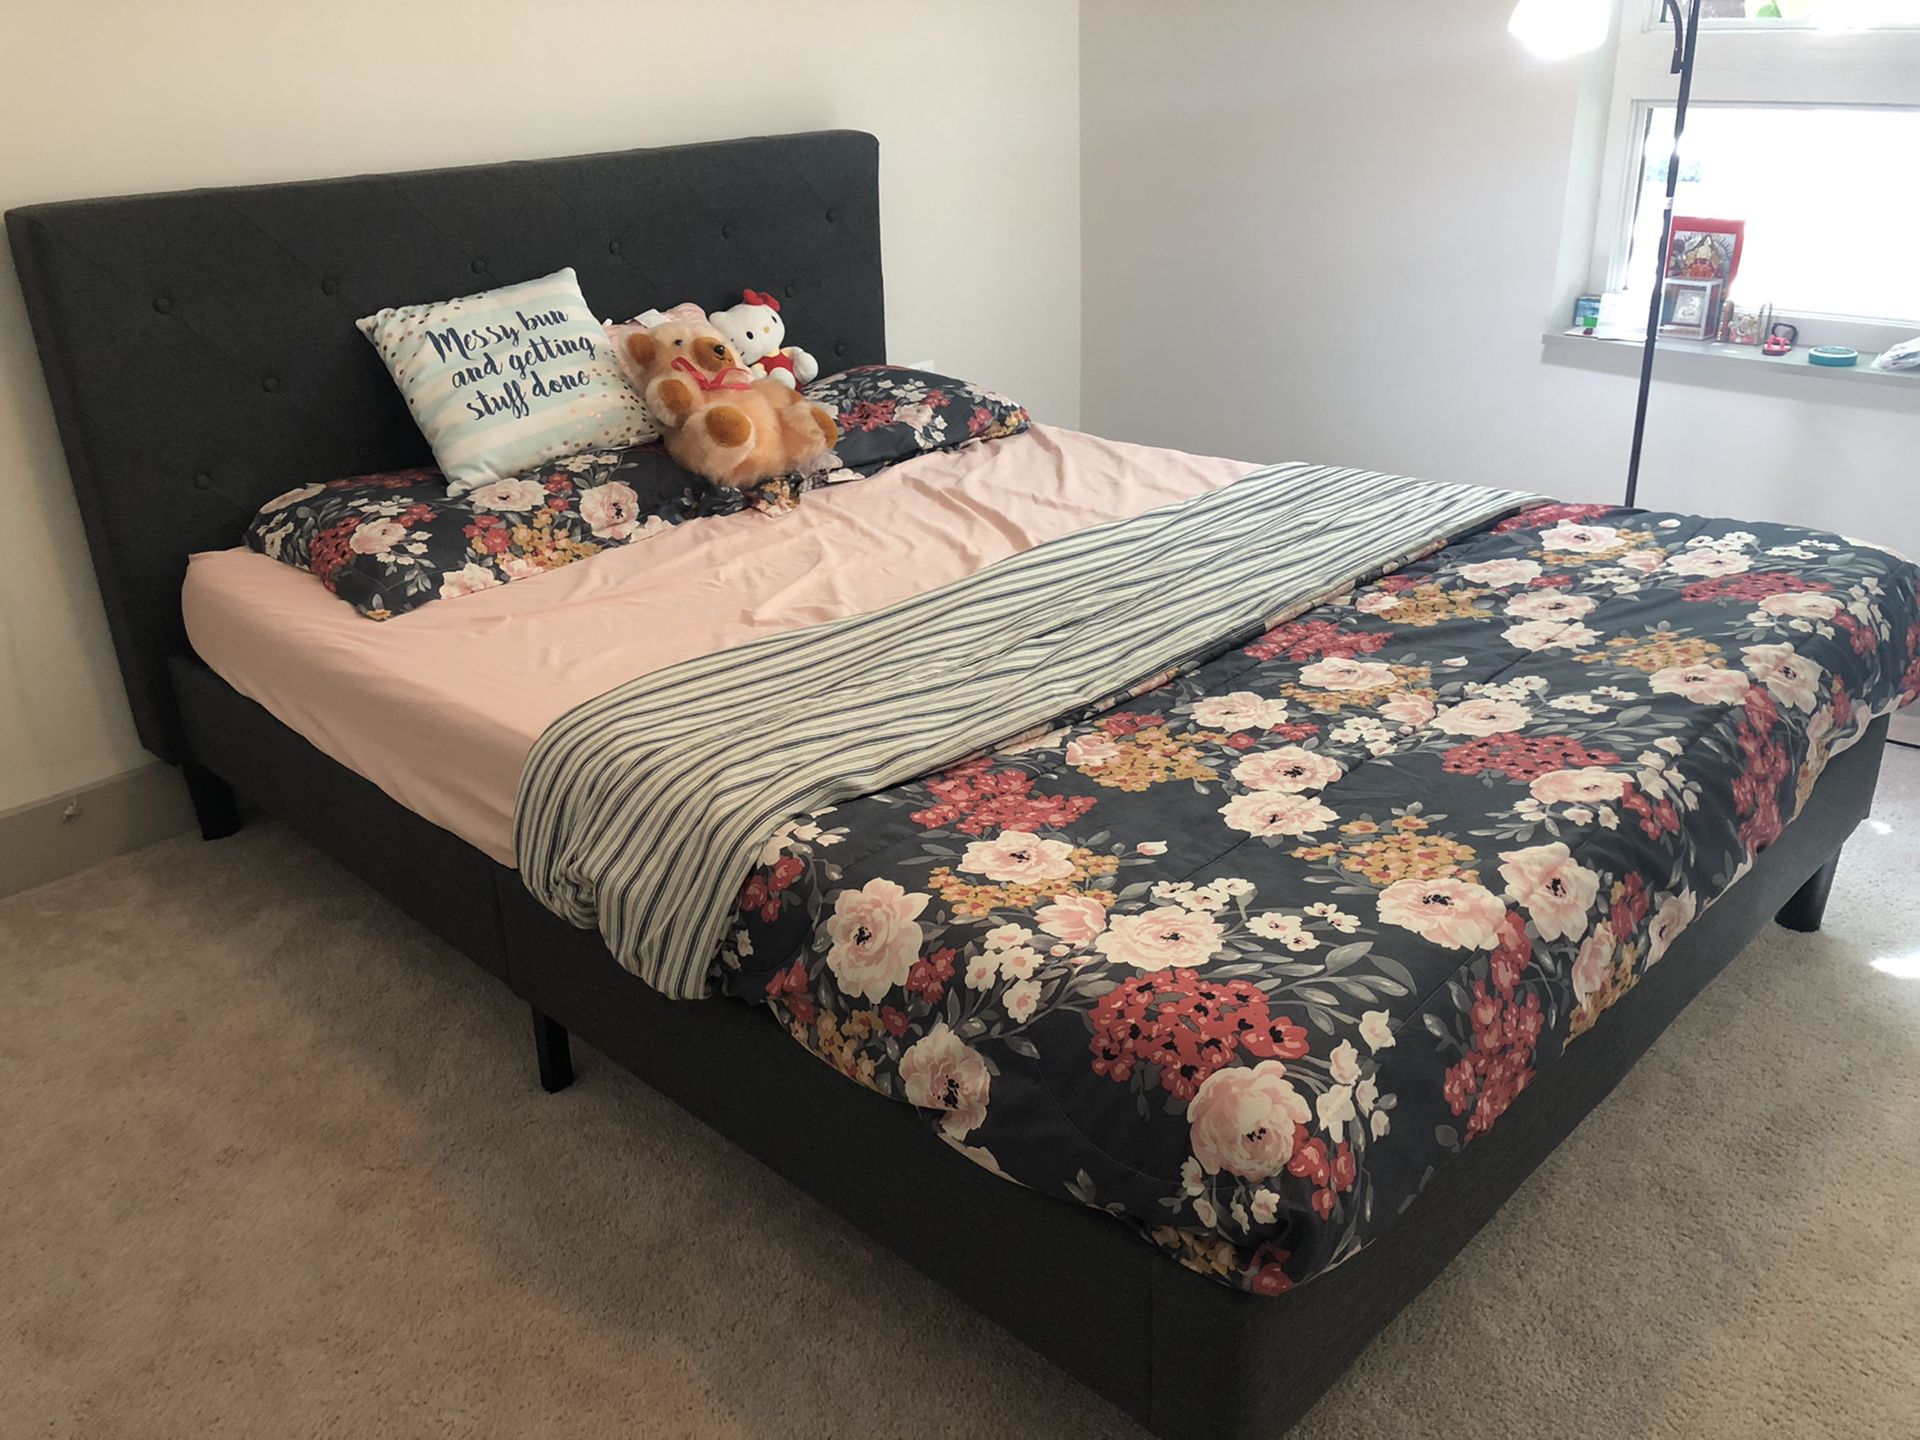 Queen bed with mattress for sale.